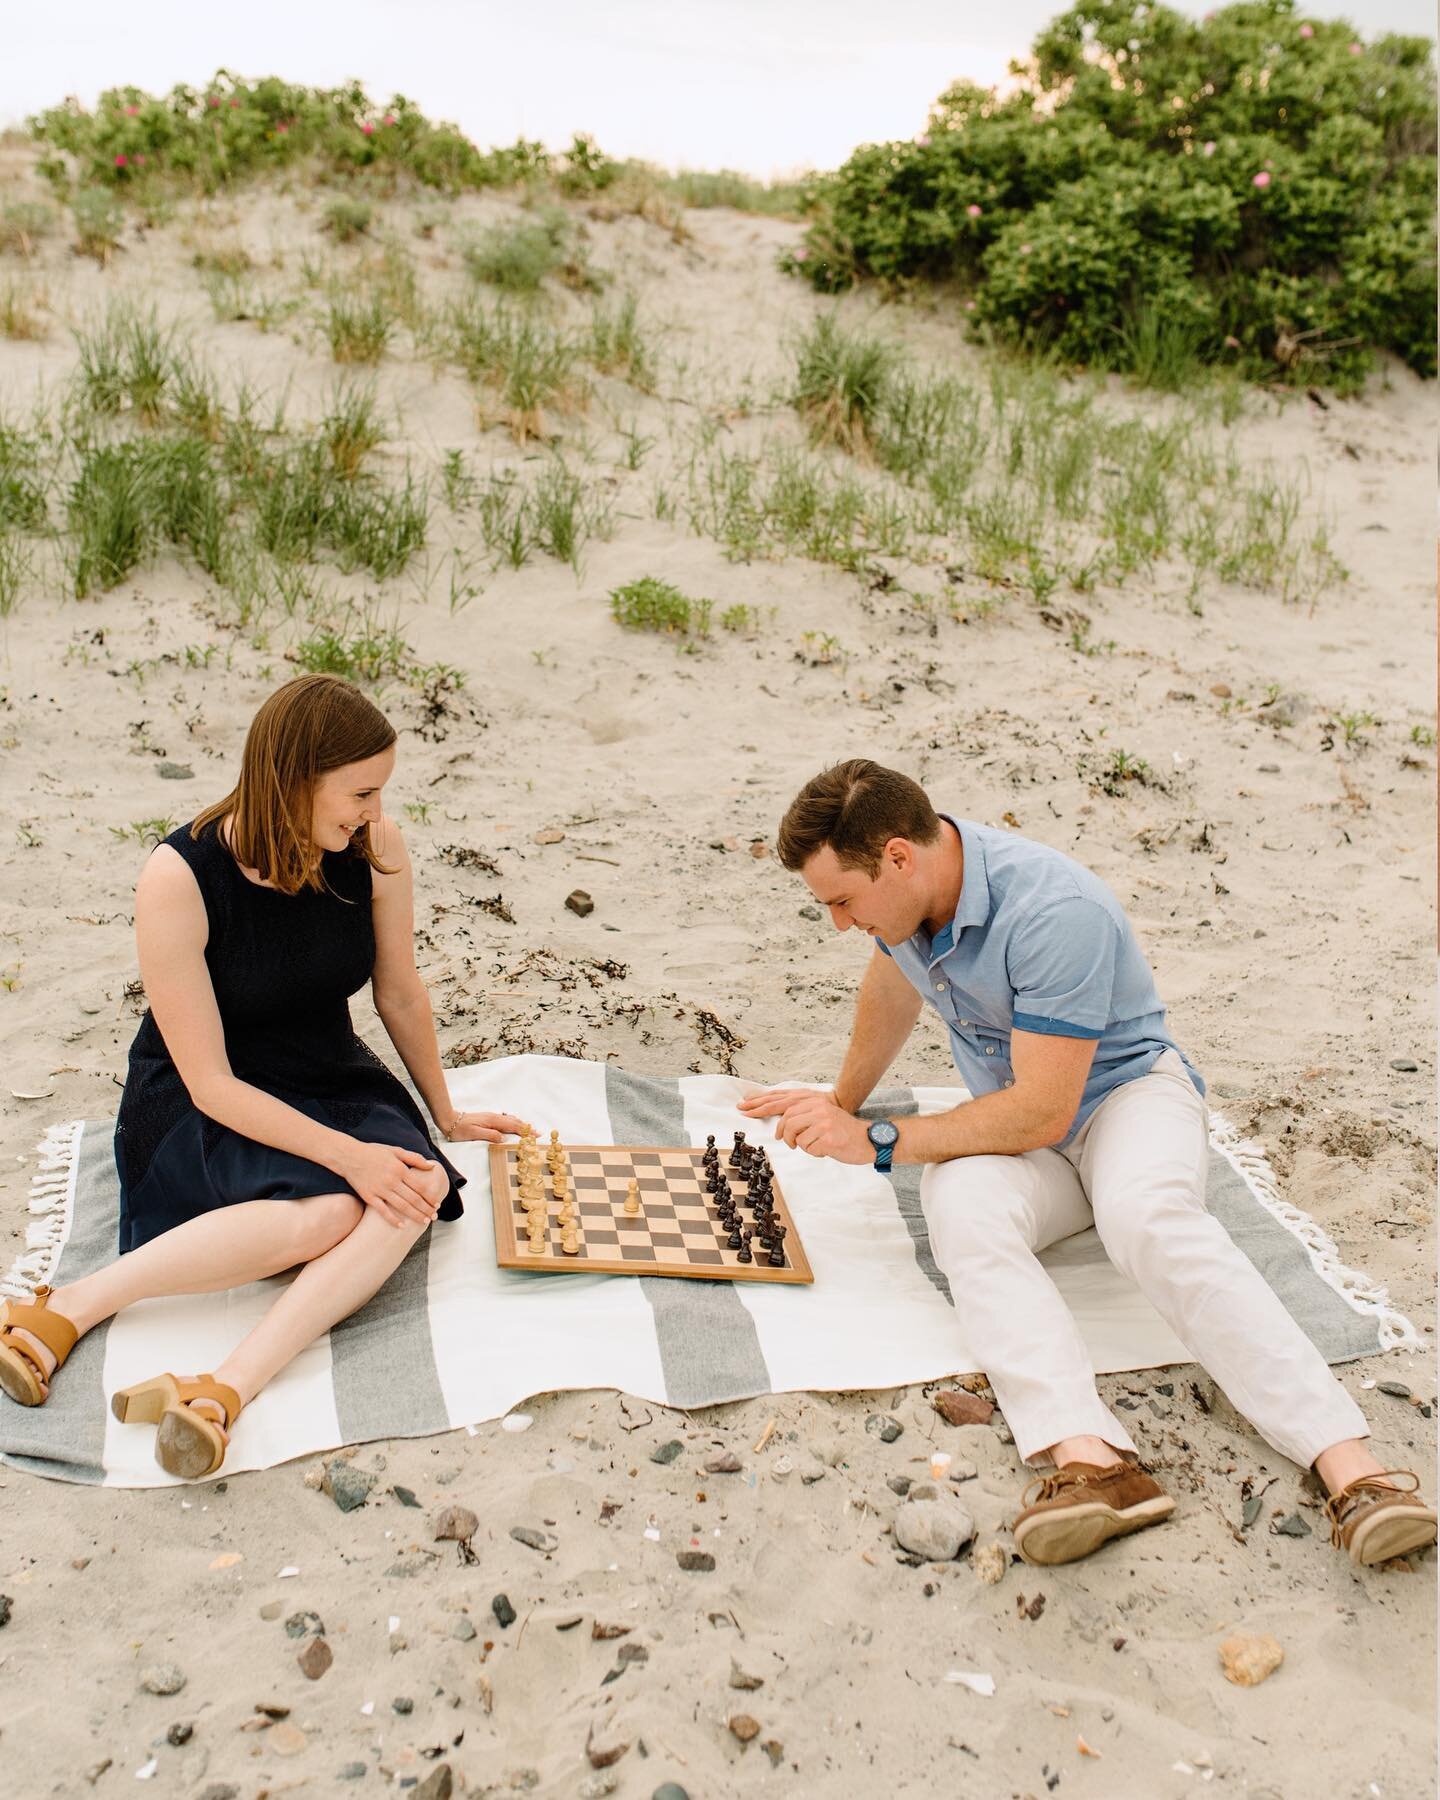 The Queen&rsquo;s Gambit meets The Notebook ♟☔️ swipe to see what I&rsquo;m talking about ➡️
⠀⠀⠀⠀⠀⠀⠀⠀⠀
Alright, here&rsquo;s the story y&rsquo;all. I got the chance to meet up with C+E the other week for their engagement session and we had some FUUUN